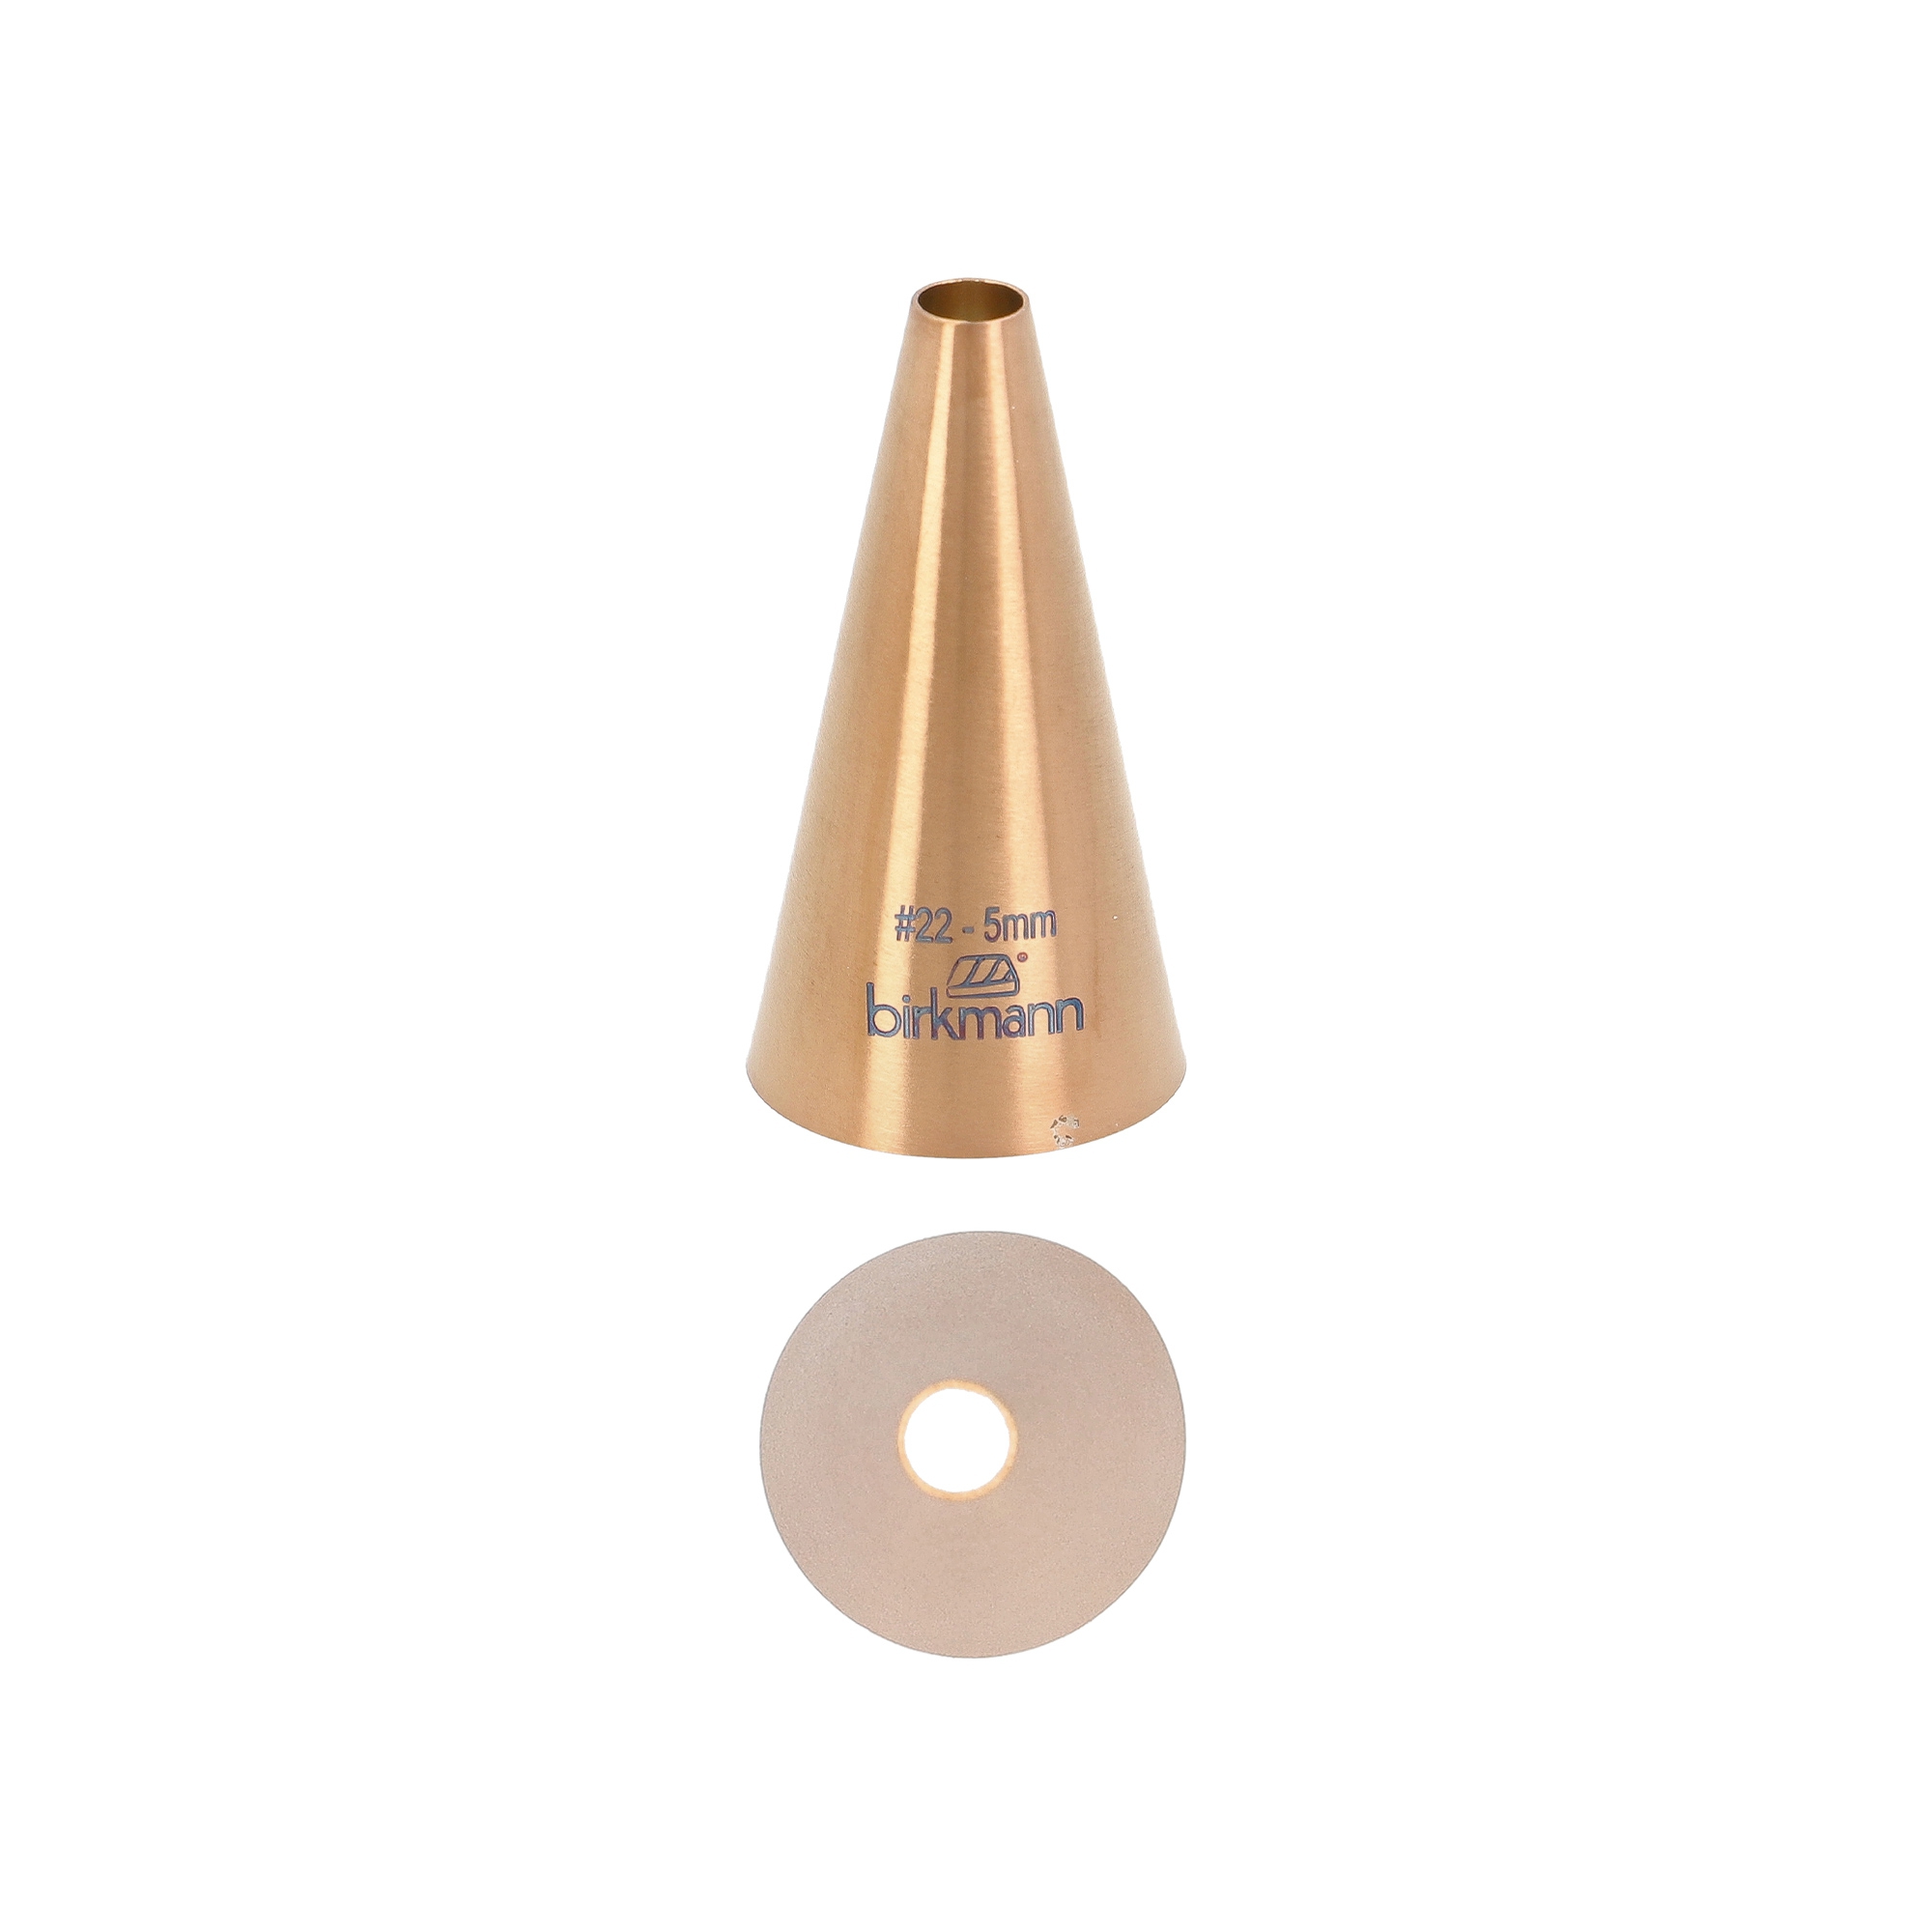 Birkmann - perforated nozzle copper colored #22 - 5mm